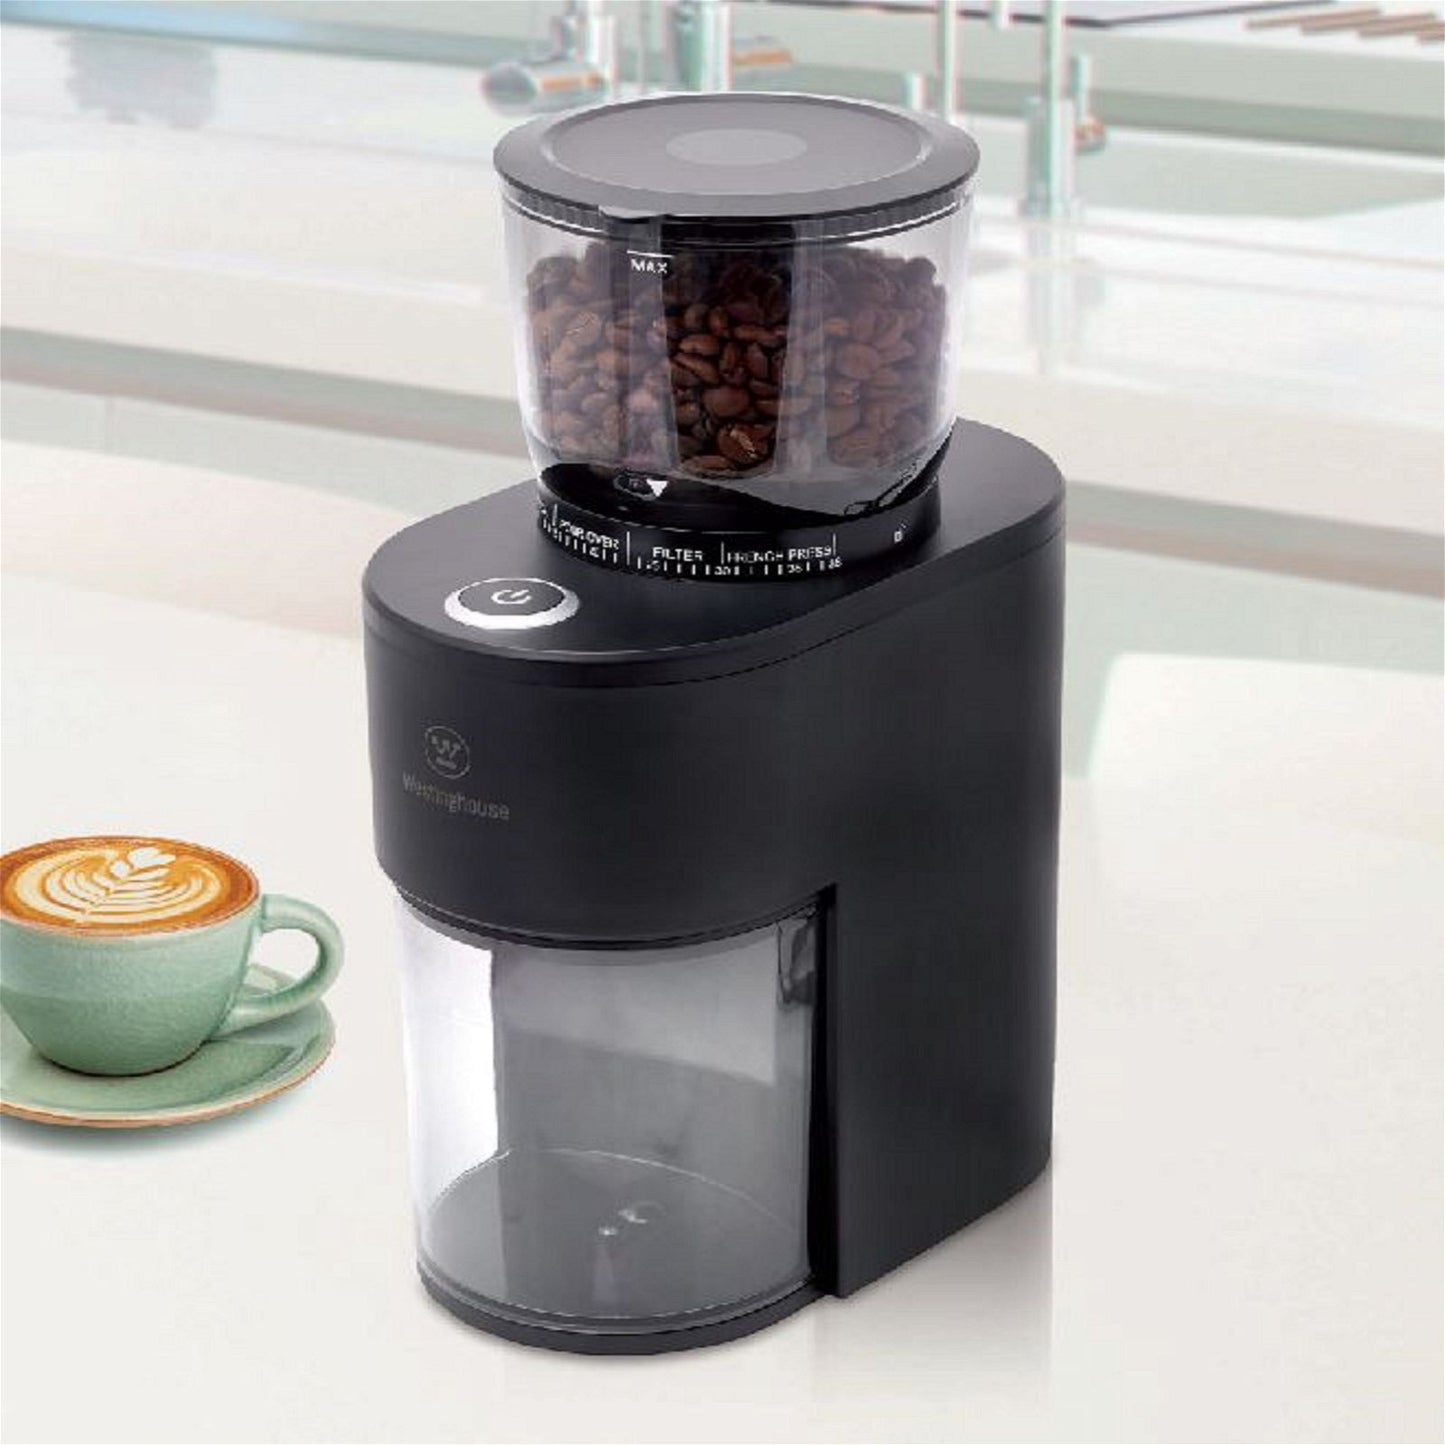 Westinghouse Conical Burr Grinder 160g Black-#product_category#- Distributed by: RVM under license